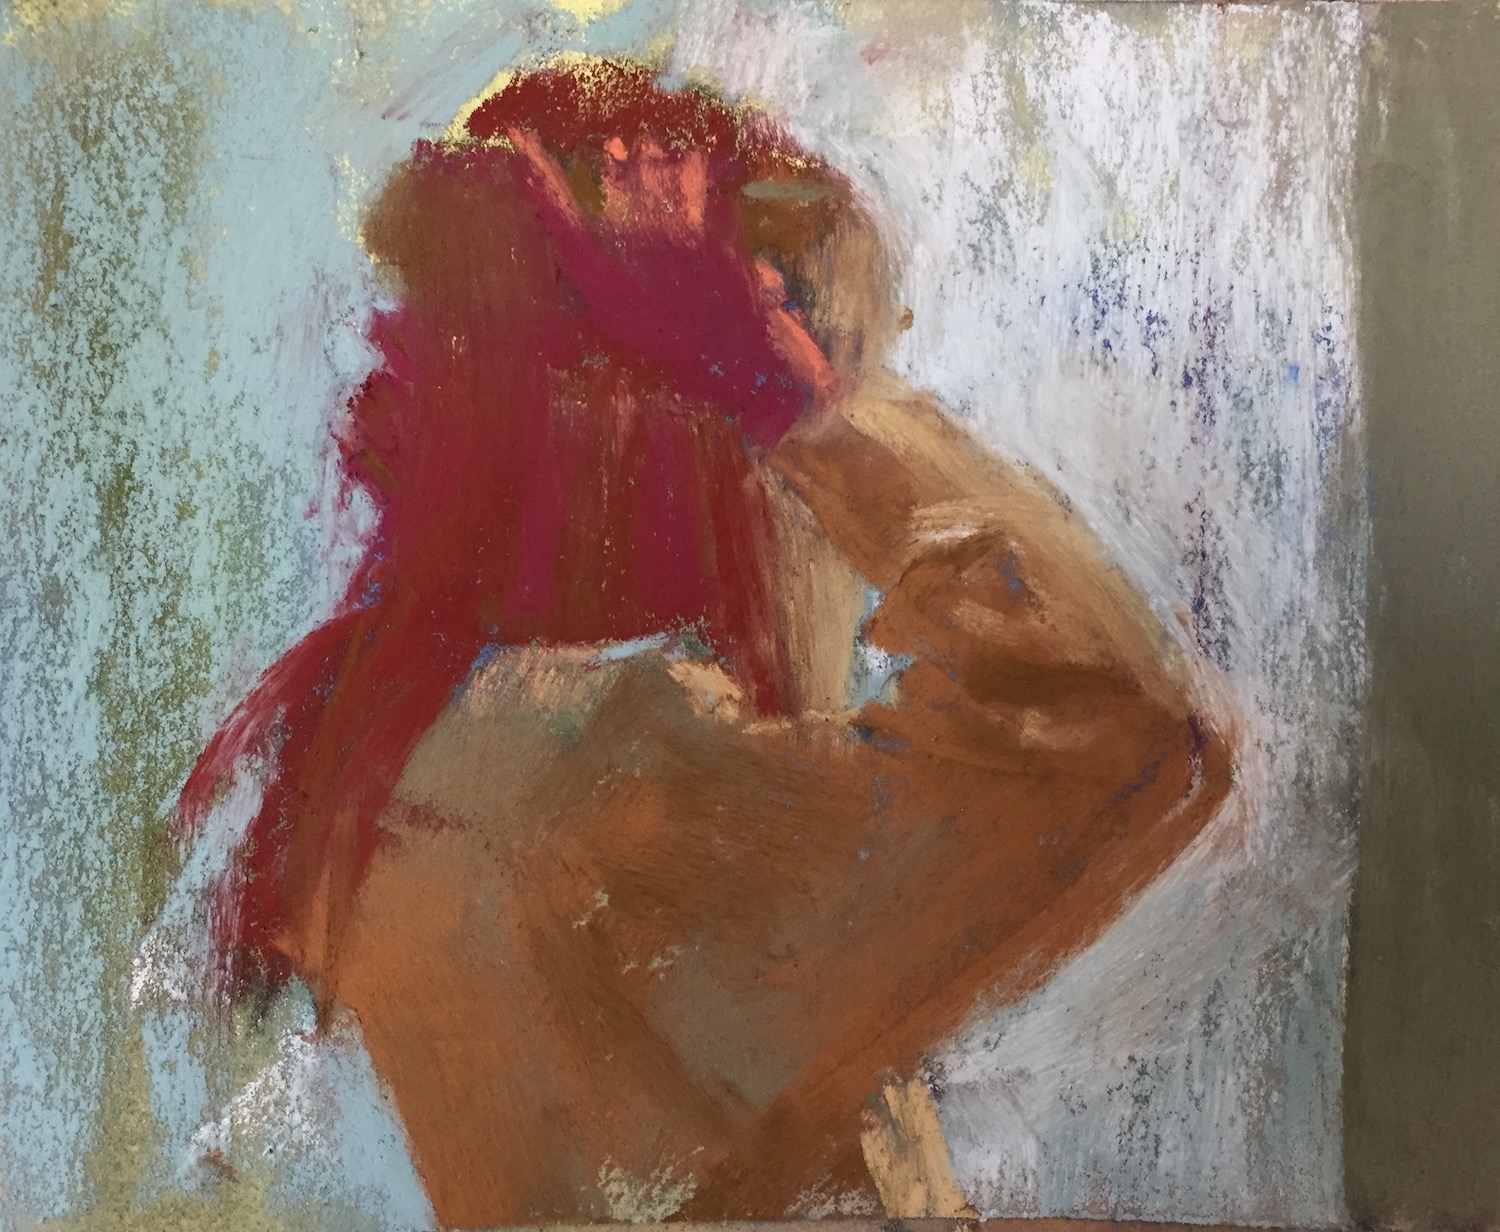 10 minute painting: Gail Sibley, "Hair Care," Unison pastels on UART 320 paper, 5 x 6 in